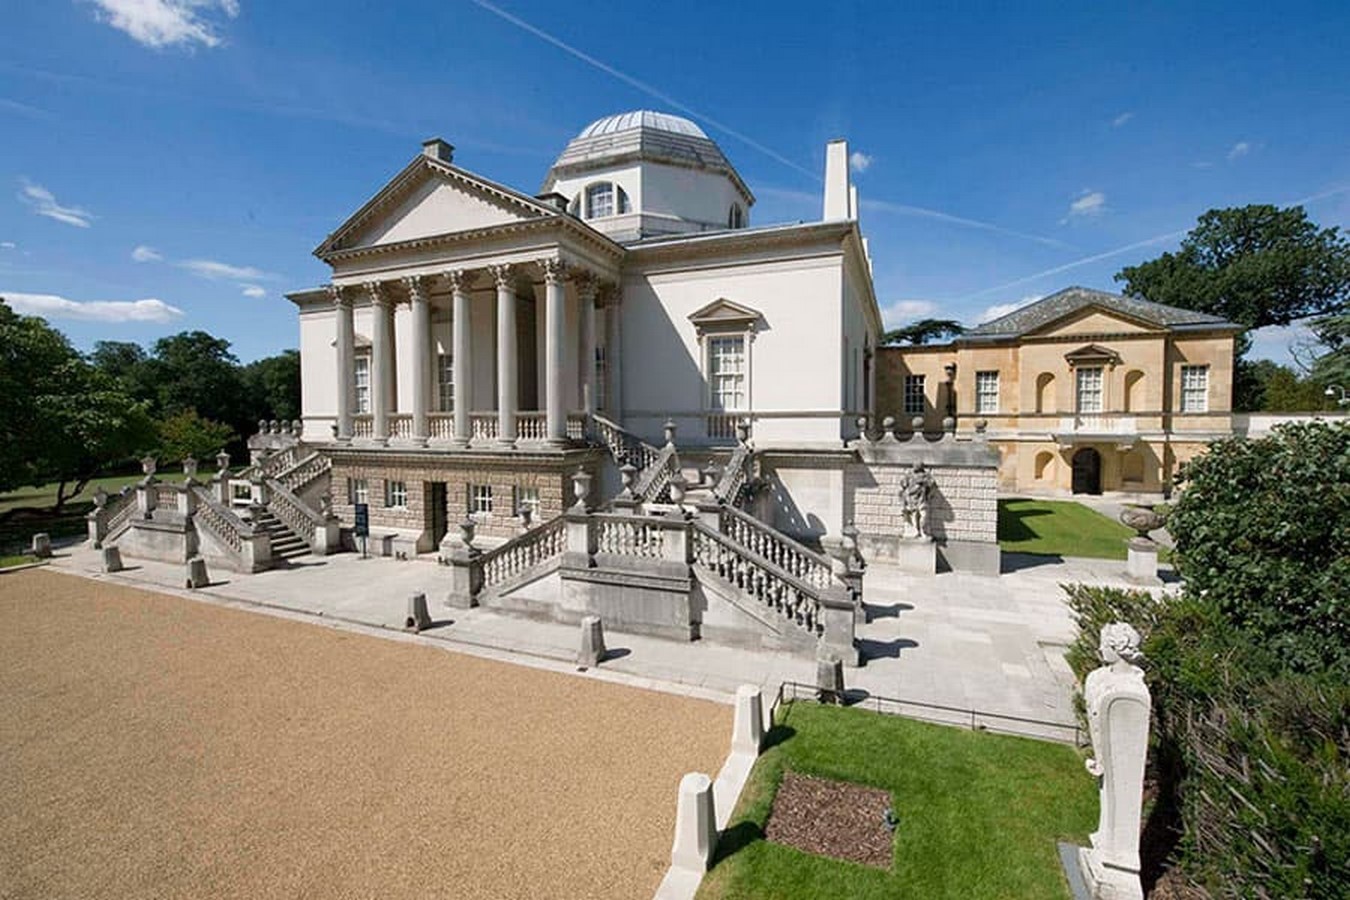 Neoclassical architecture is thought to have developed in two phases: